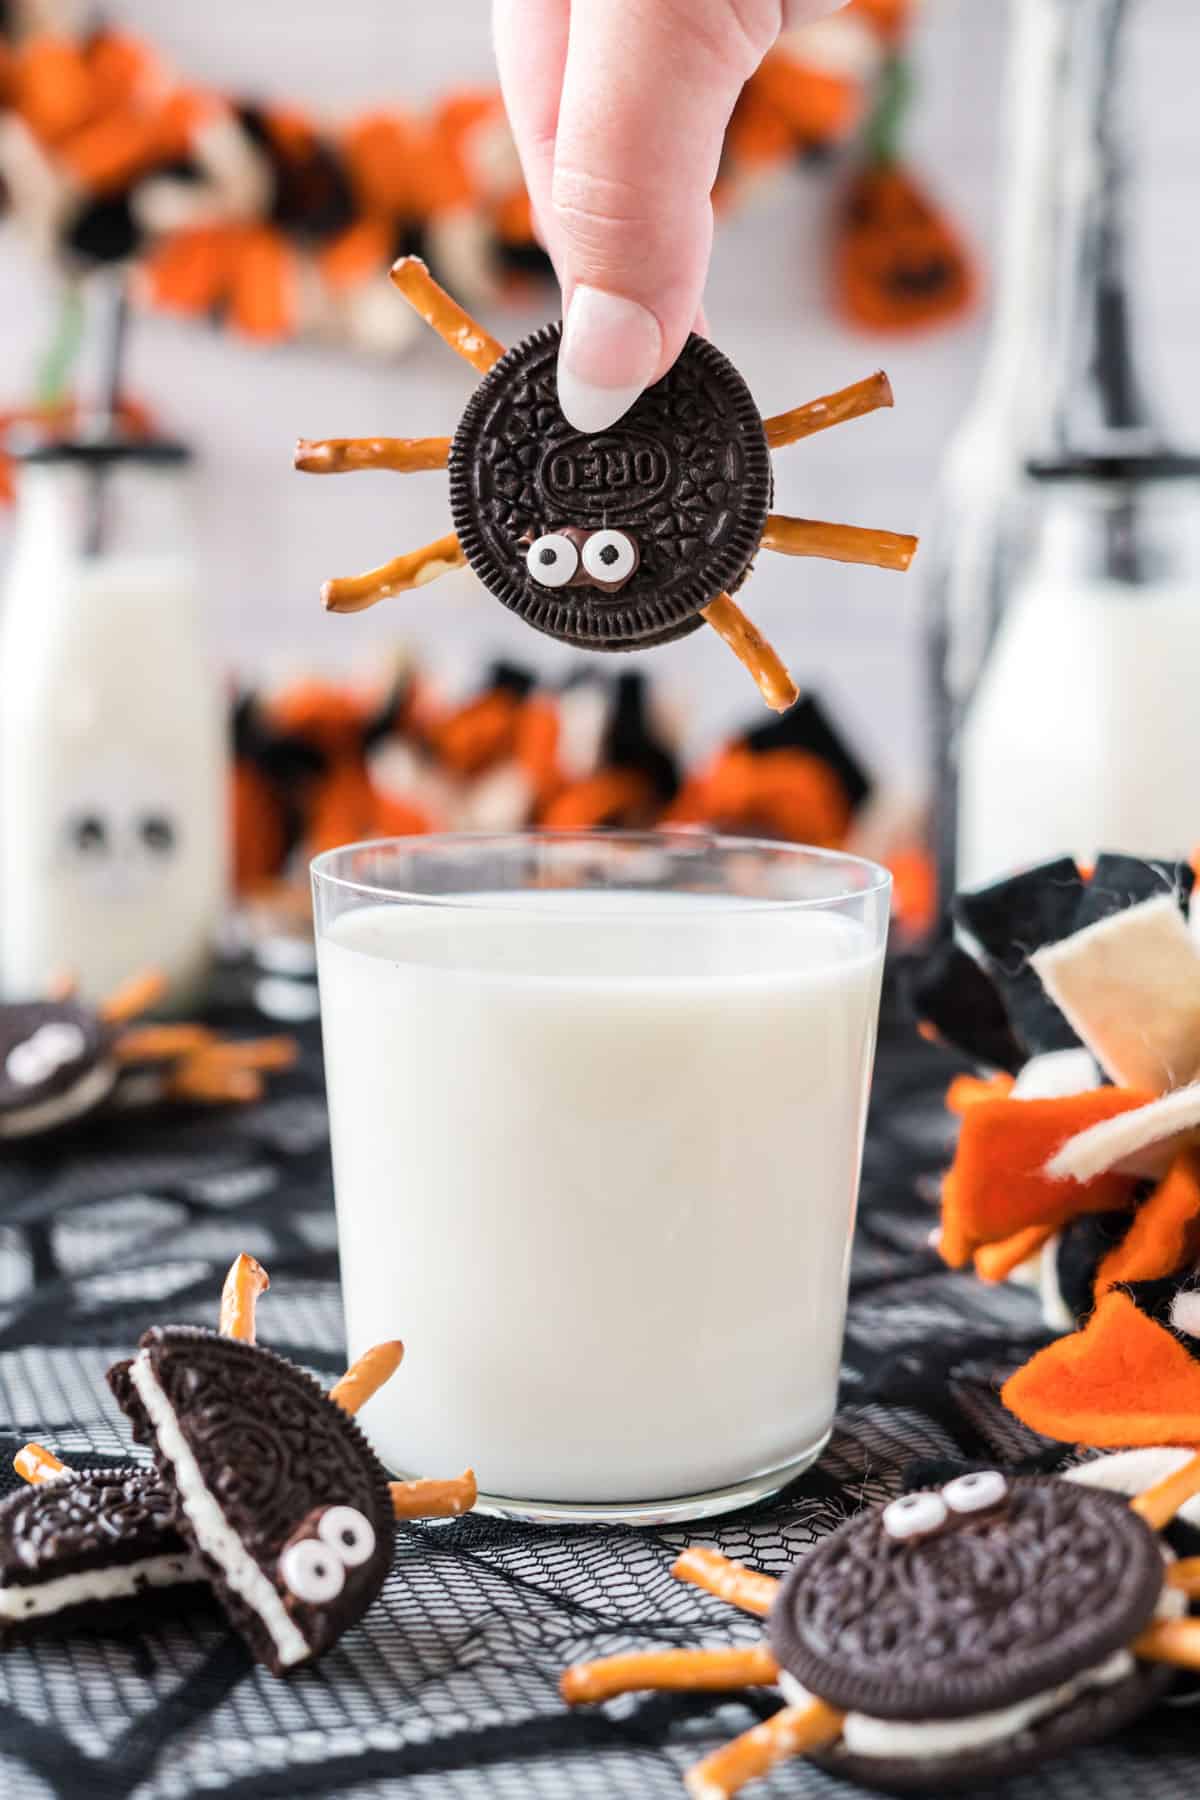 oreo spider and a glass of milk for dipping